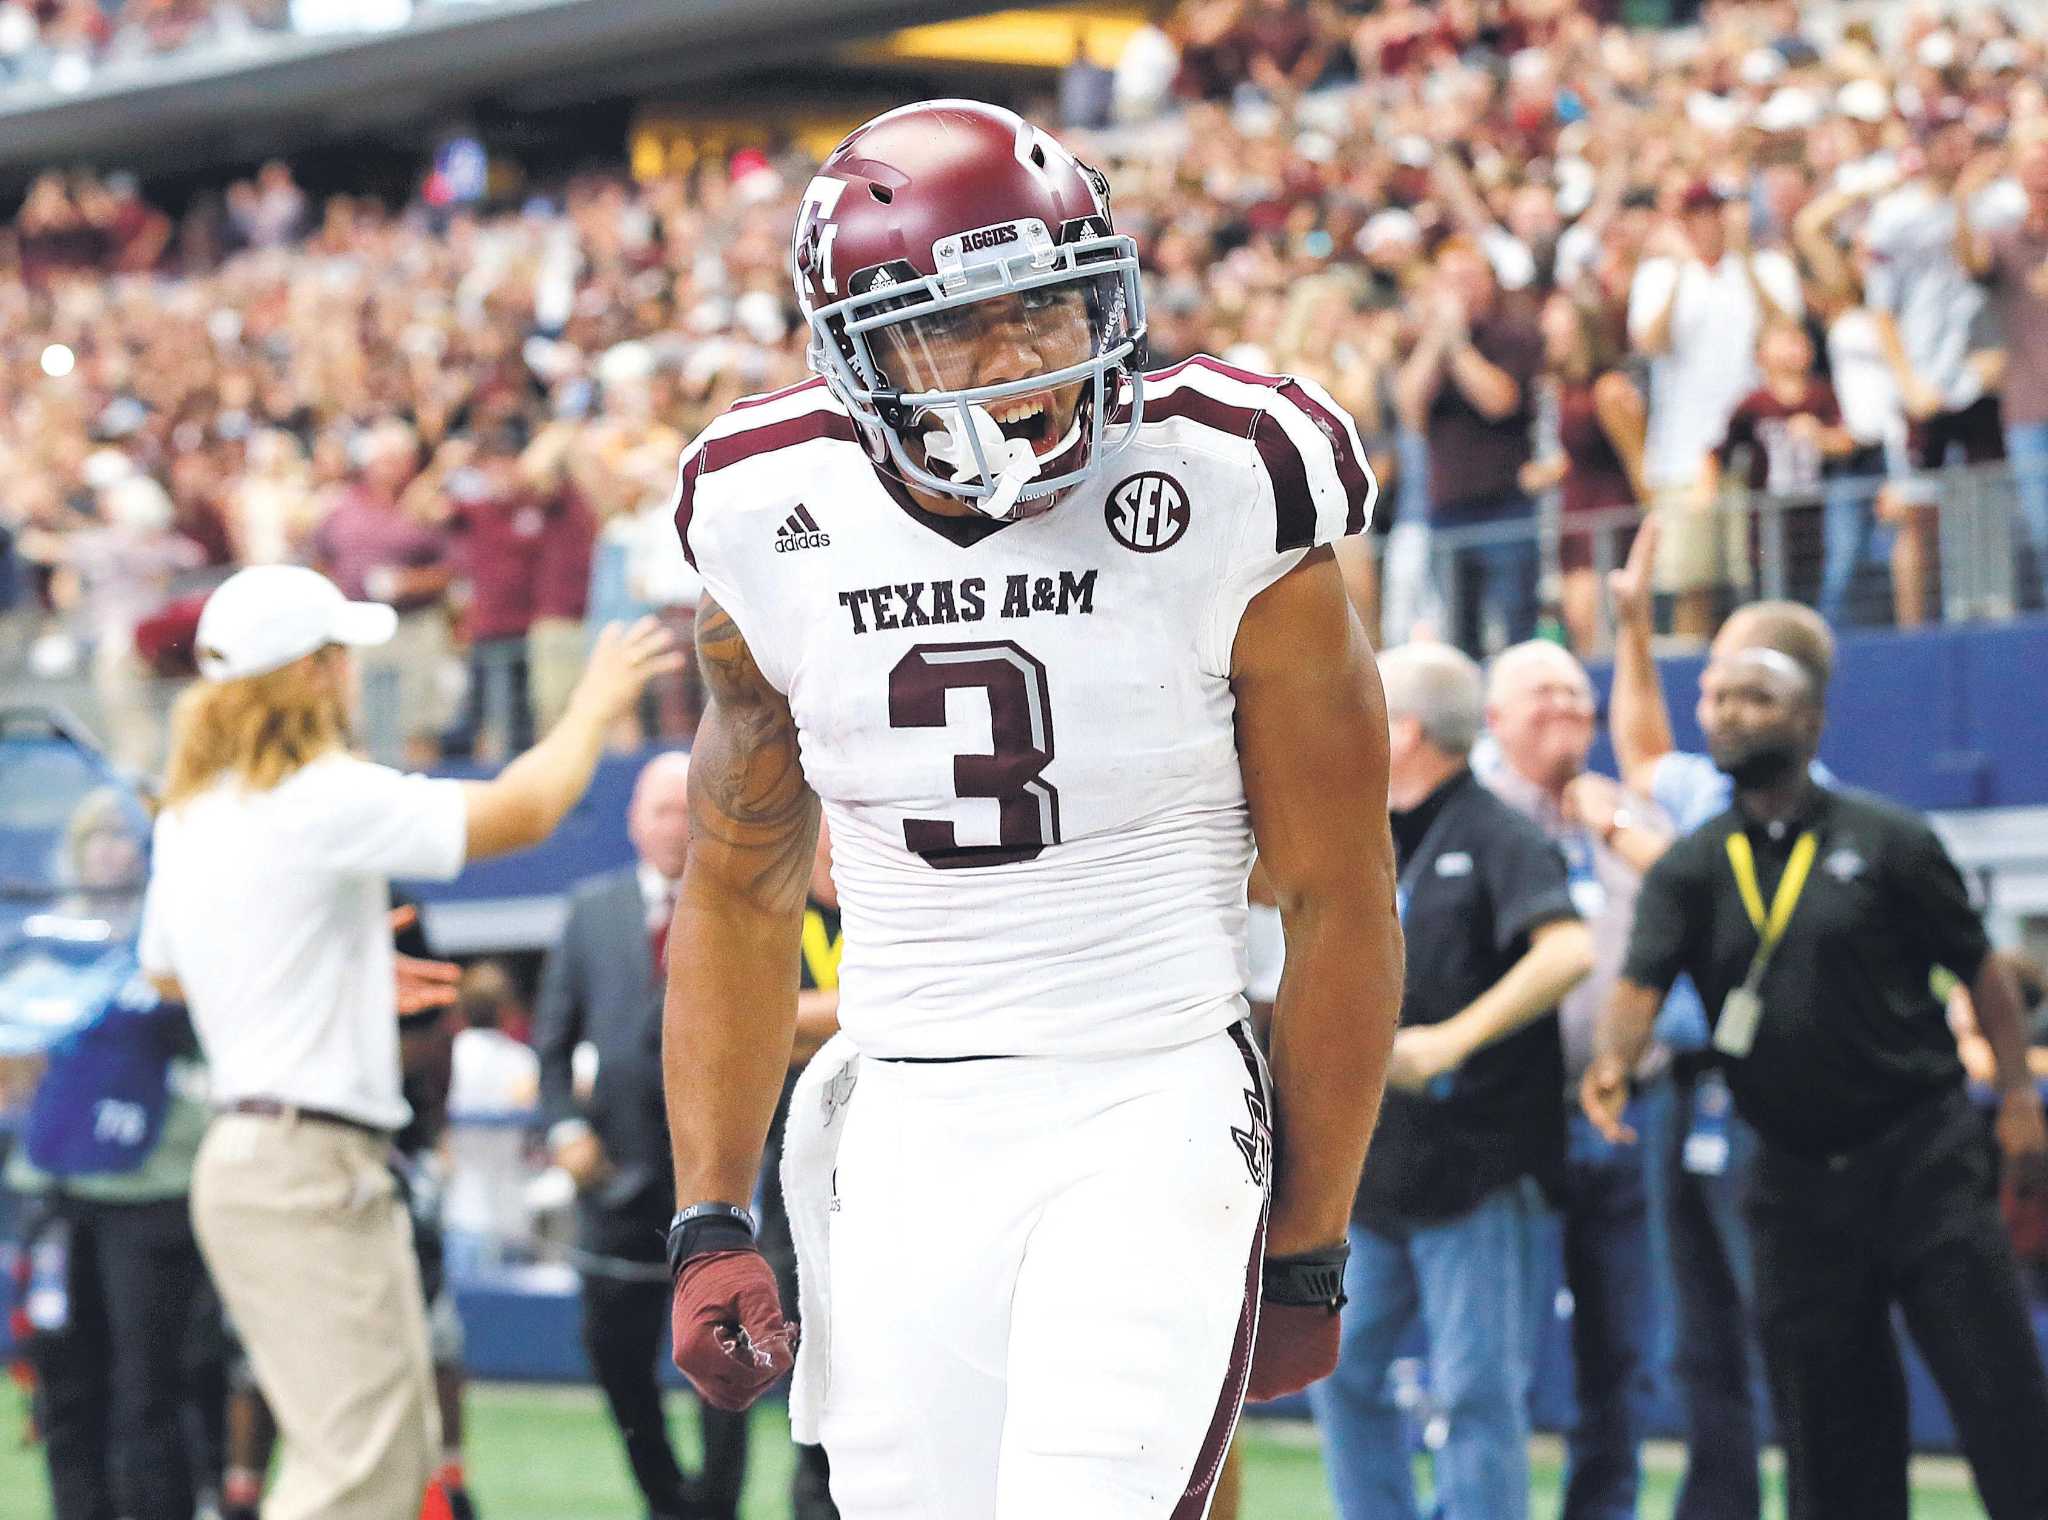 Cardinals sign second-round pick, receiver Christian Kirk